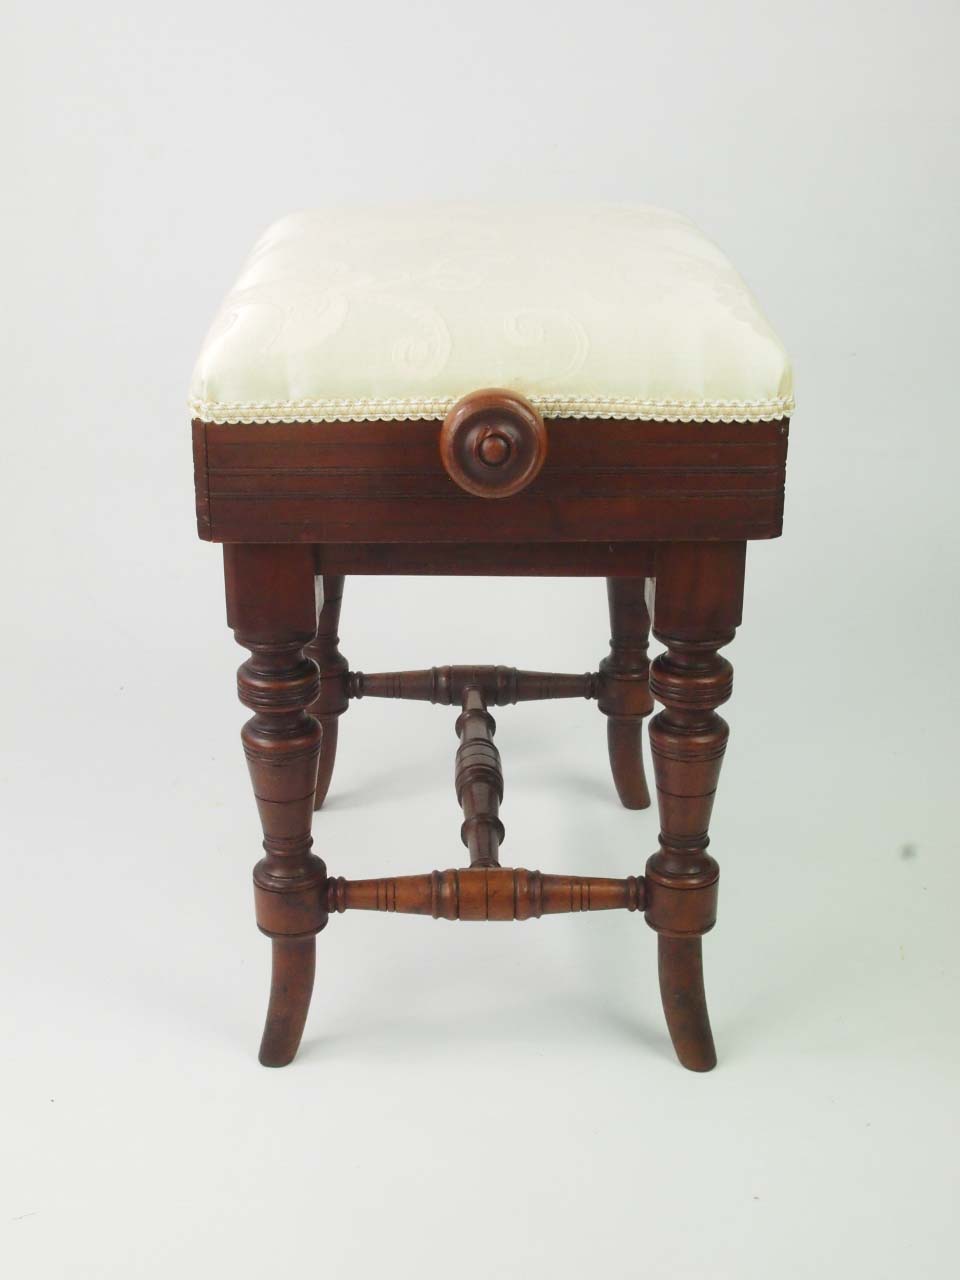 Antique Victorian Rise And Fall Piano Stool With Makers Stamp